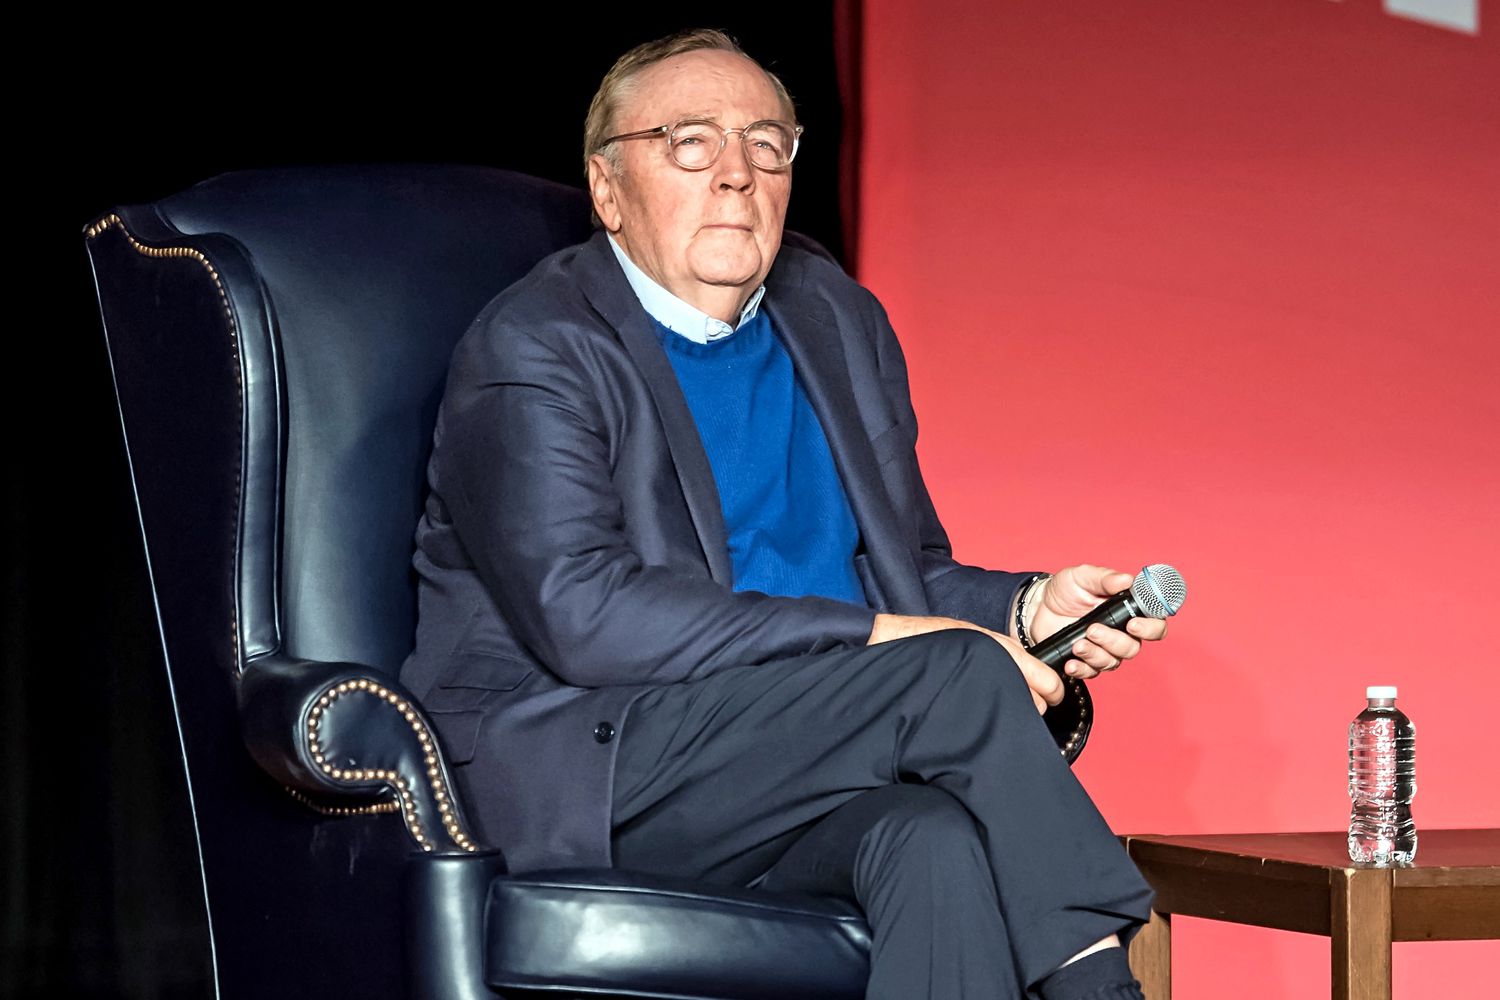 James Patterson wearing a black coat while holding a mic